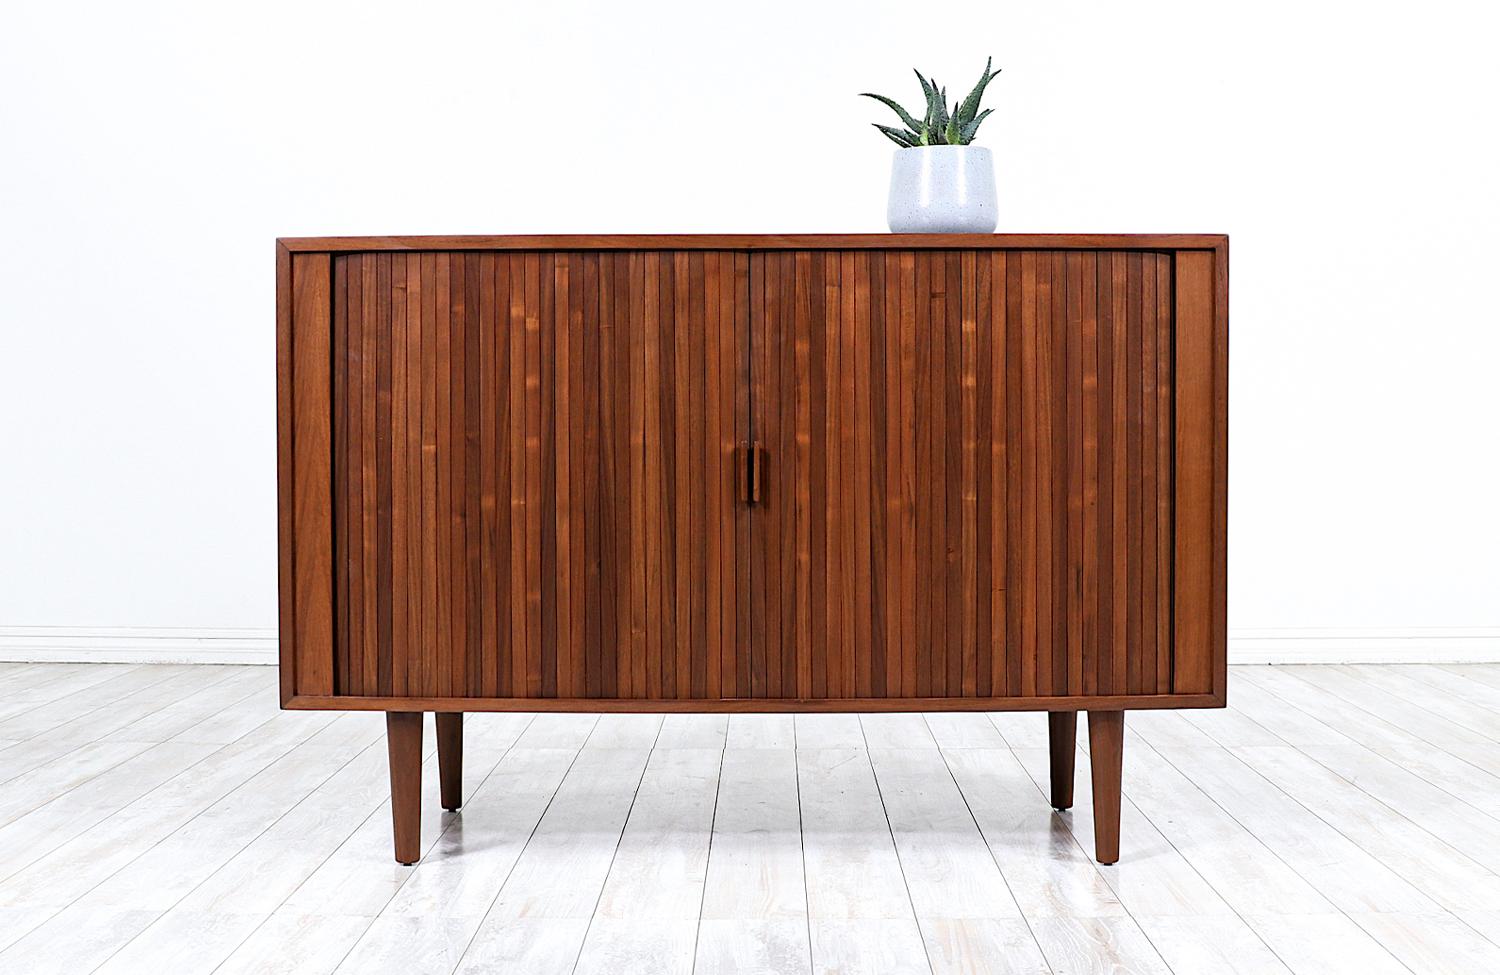 Mid-Century Modern tambour door credenza designed and manufactured in the United States circa 1960’s. Low in profile and compact in size, this beautifully refinished walnut storage unit is accented with inconspicuous door pulls for functional ease.